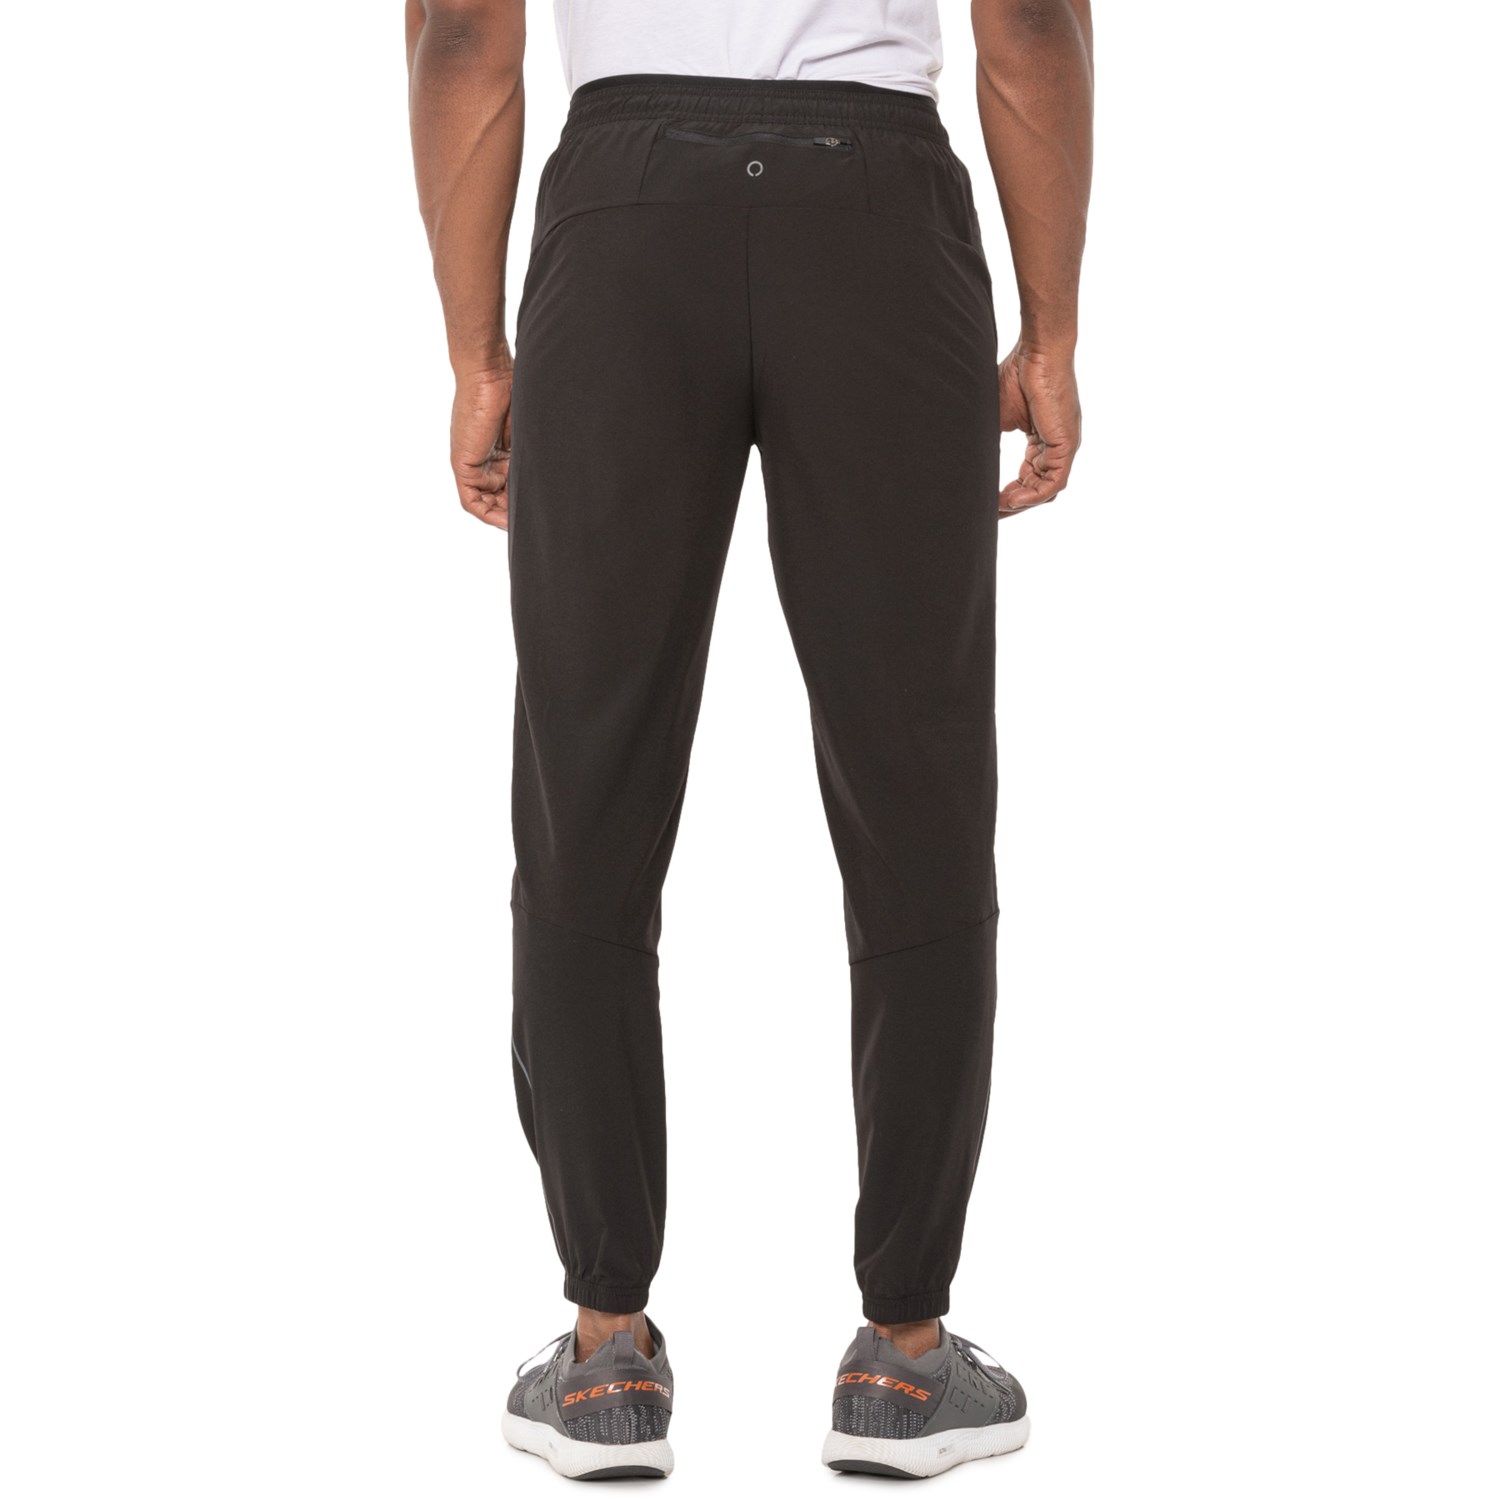 Skora Stretch-Woven Running Joggers (For Men) - Save 31%